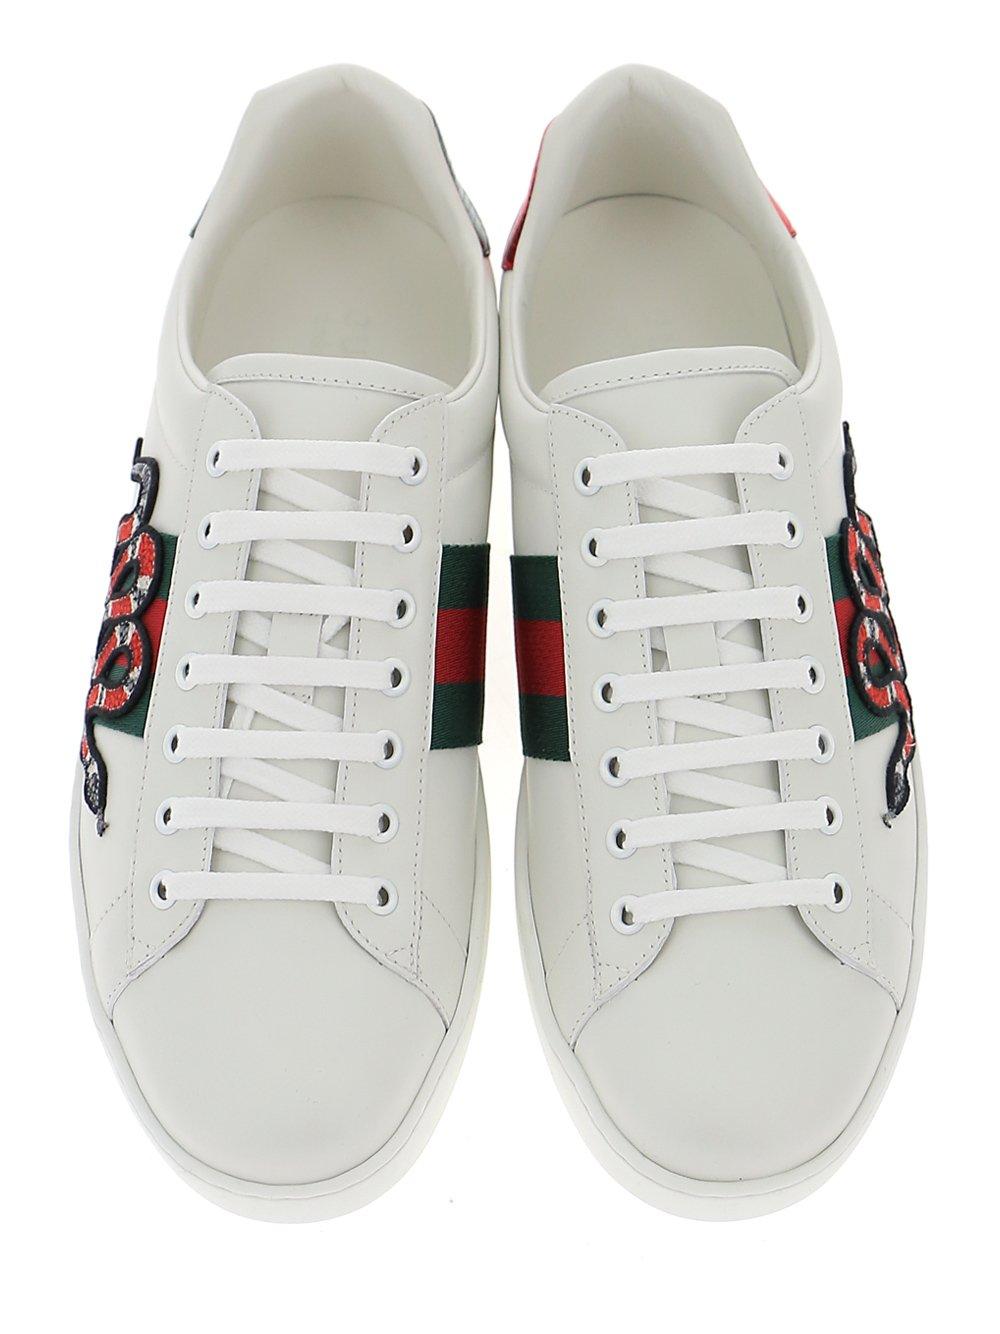 gucci snake sneakers mens